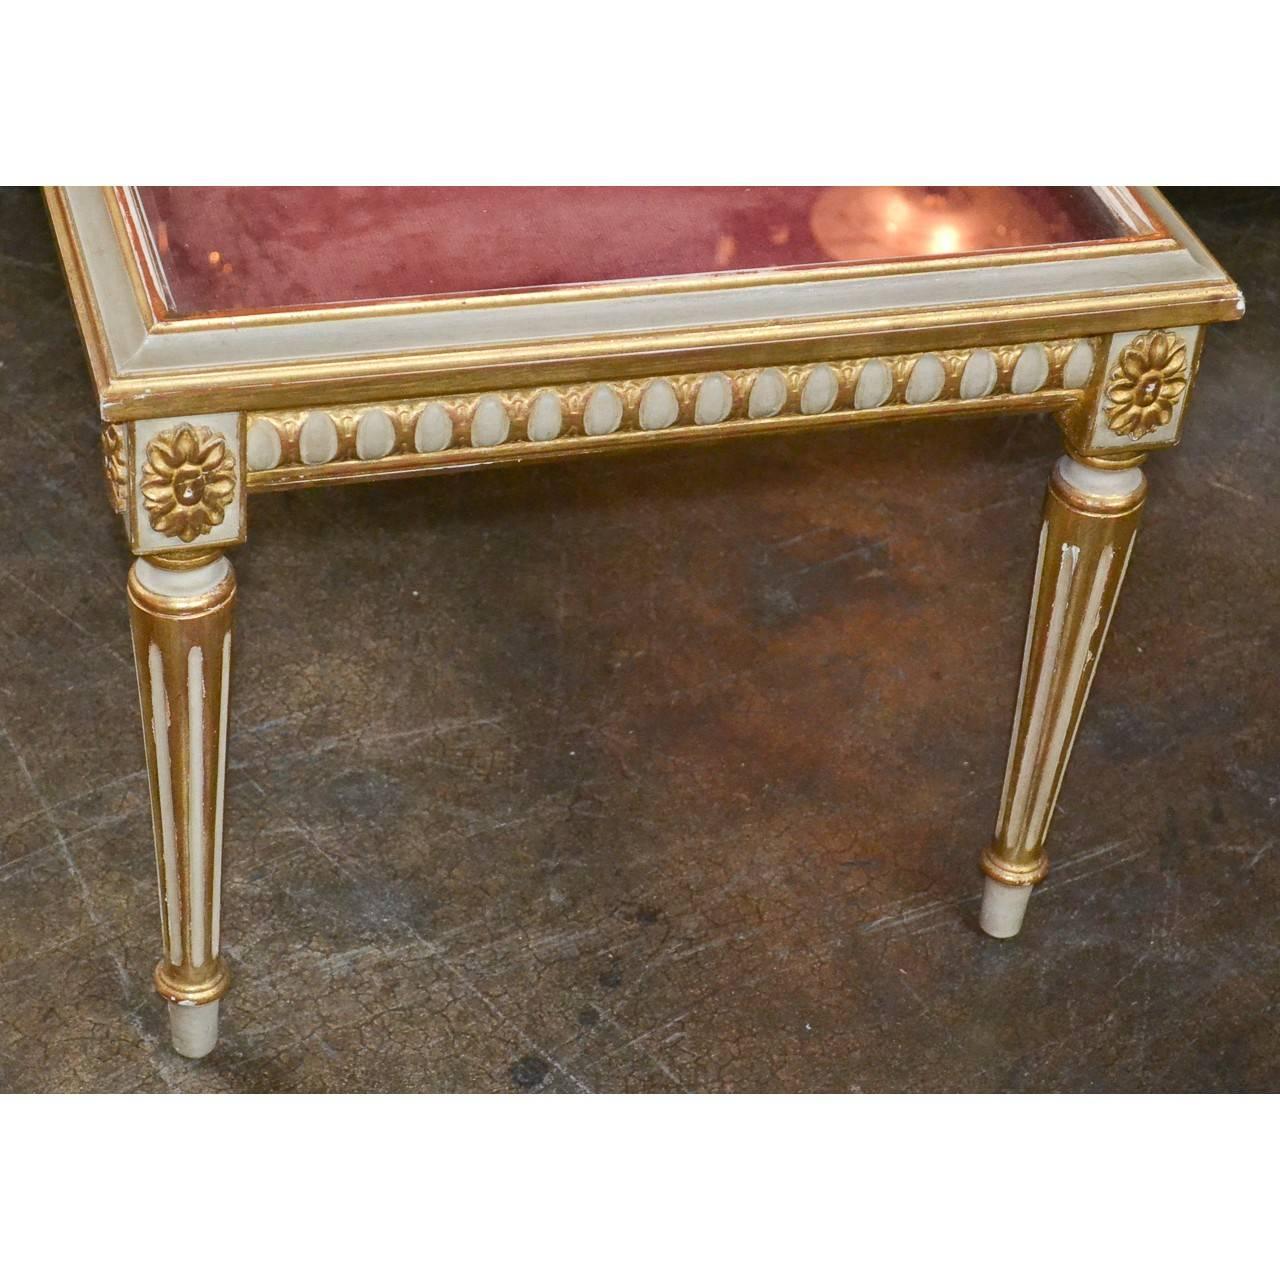 Mid-20th Century French Louis XVI Style Parcel-Gilt Display Low Table